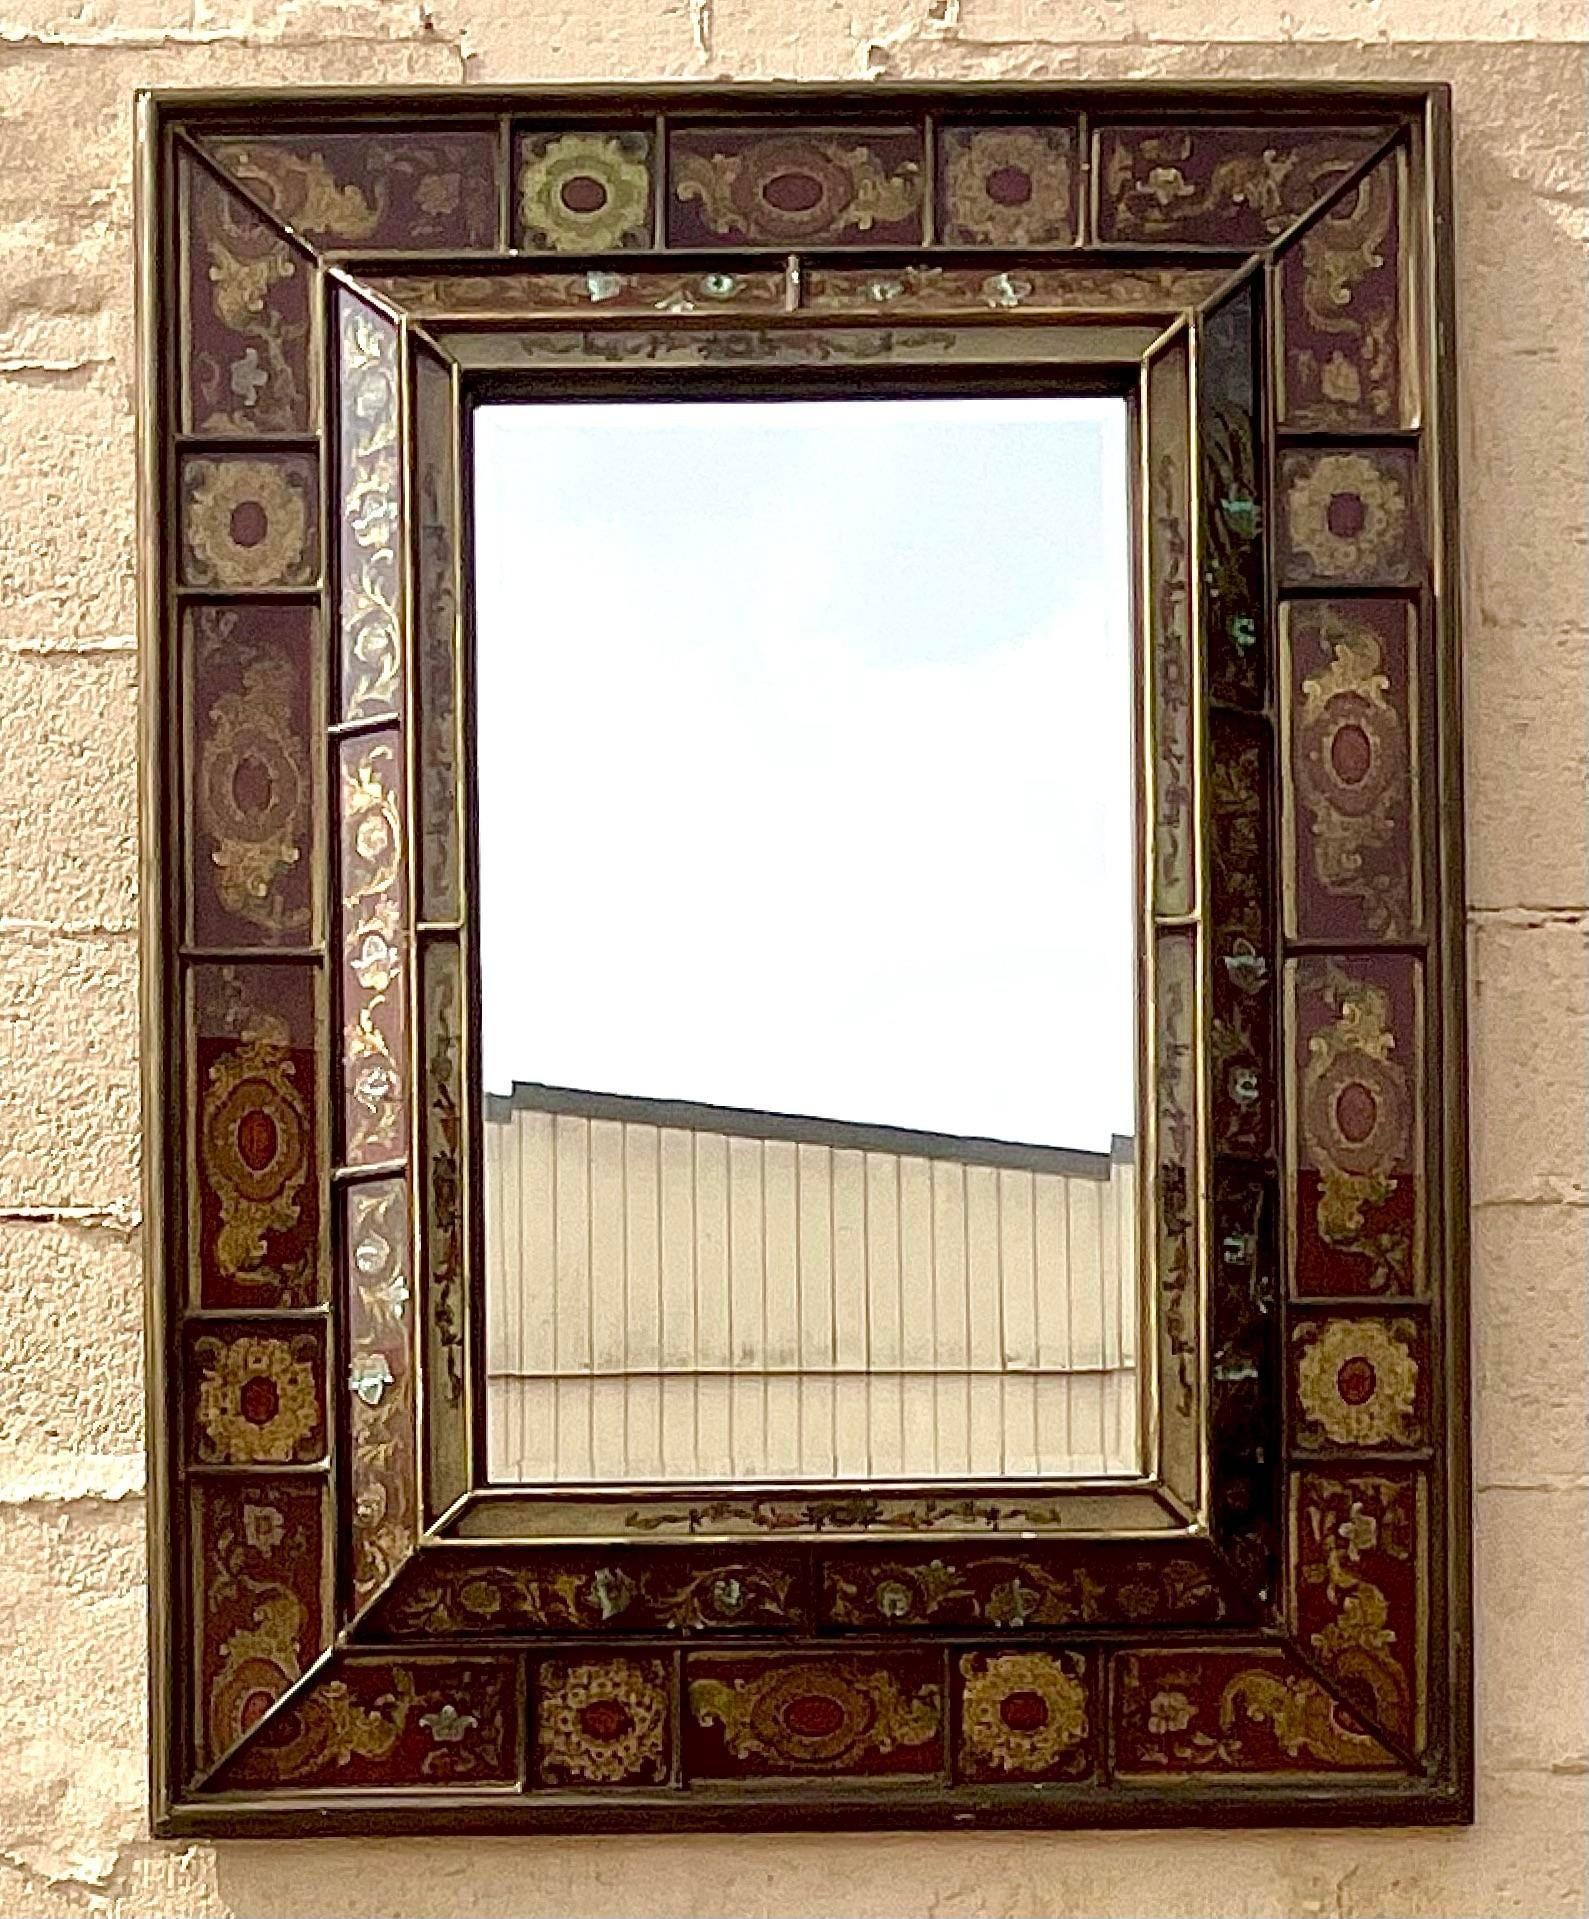 Add a touch of vintage charm with our Vintage Boho Eglomise Mirror. This exquisite piece features eglomise glass with intricate detailing, blending Bohemian flair with classic American style. A timeless mirror that adds elegance and character to any